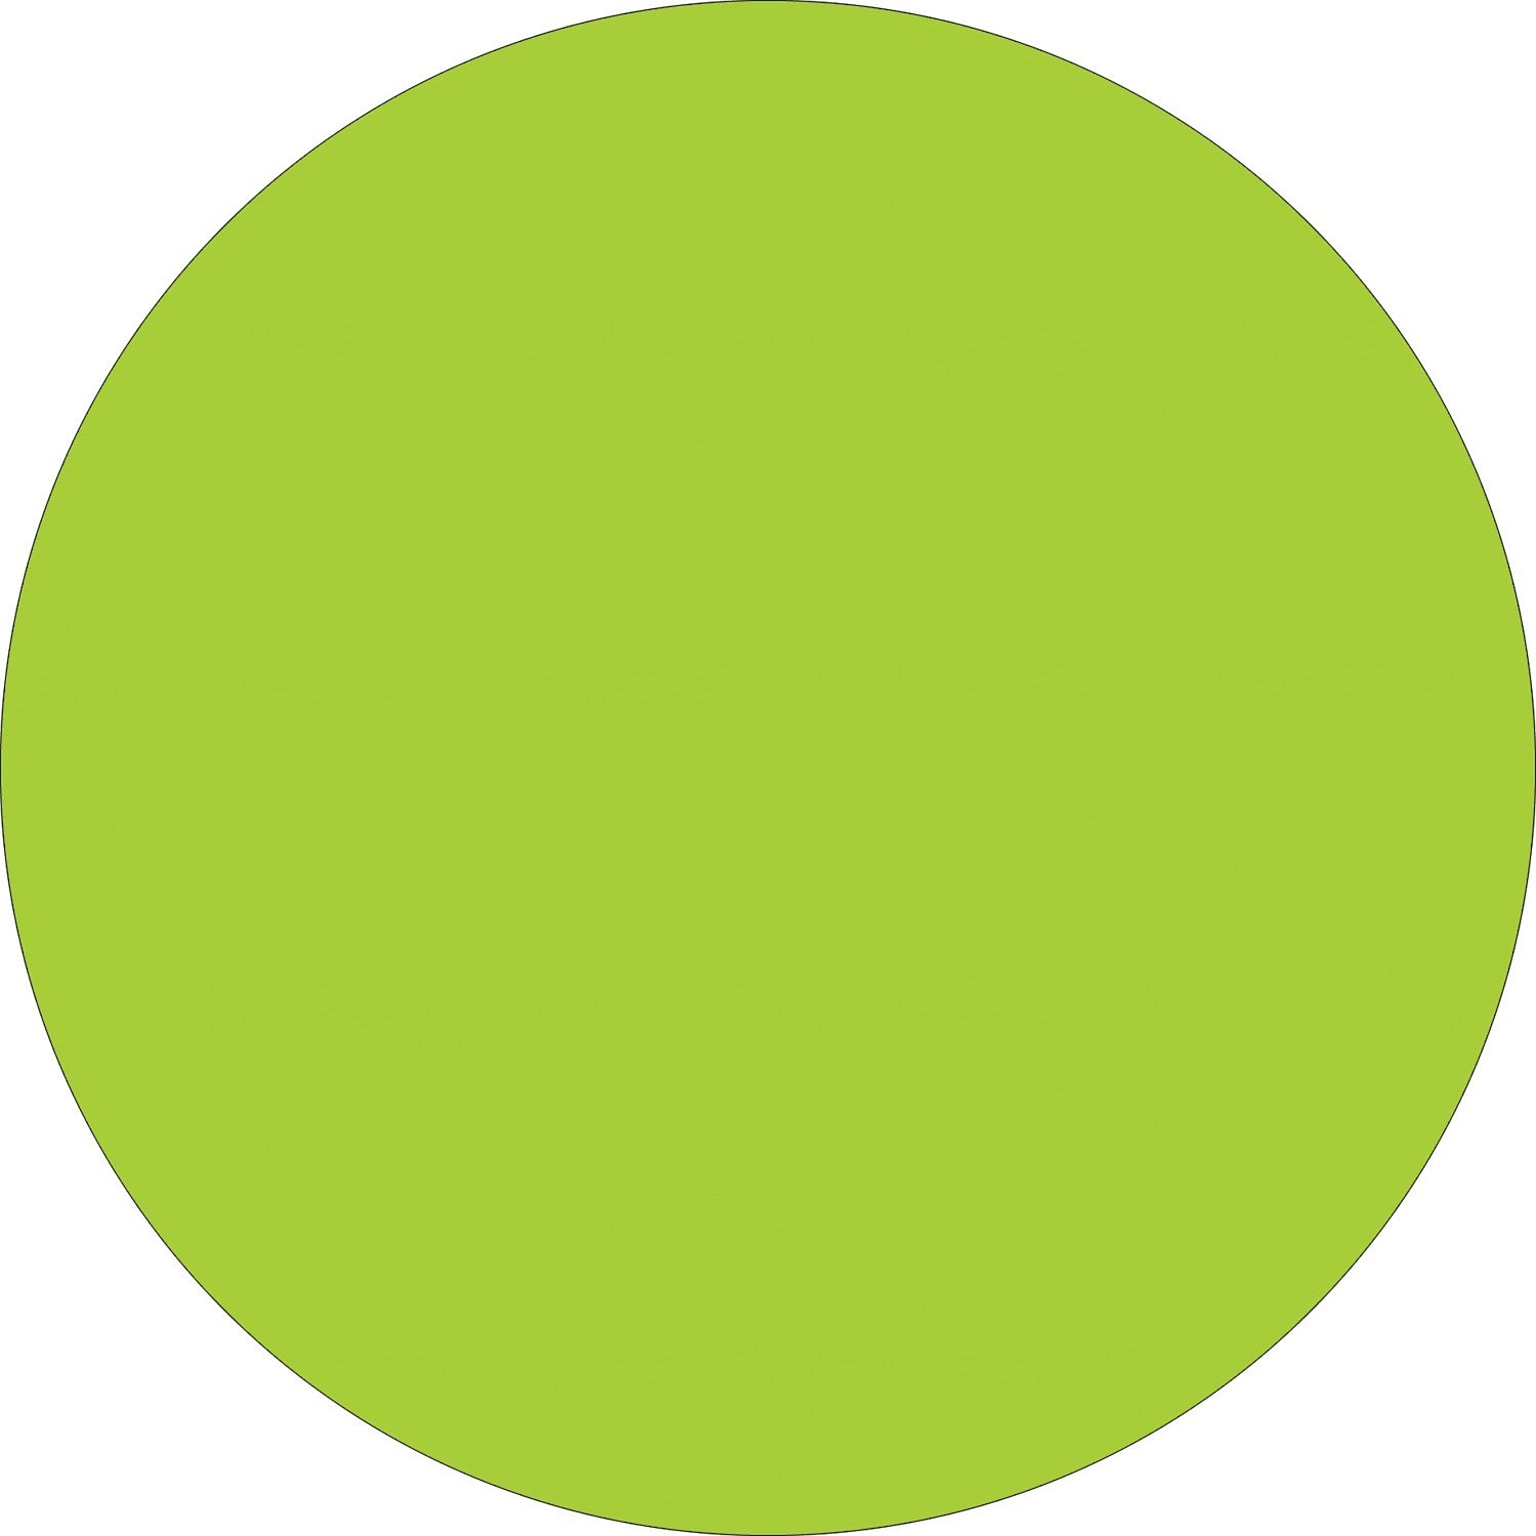 Tape Logic 1 Circle Inventory Label, Fluorescent Green, 500/Roll